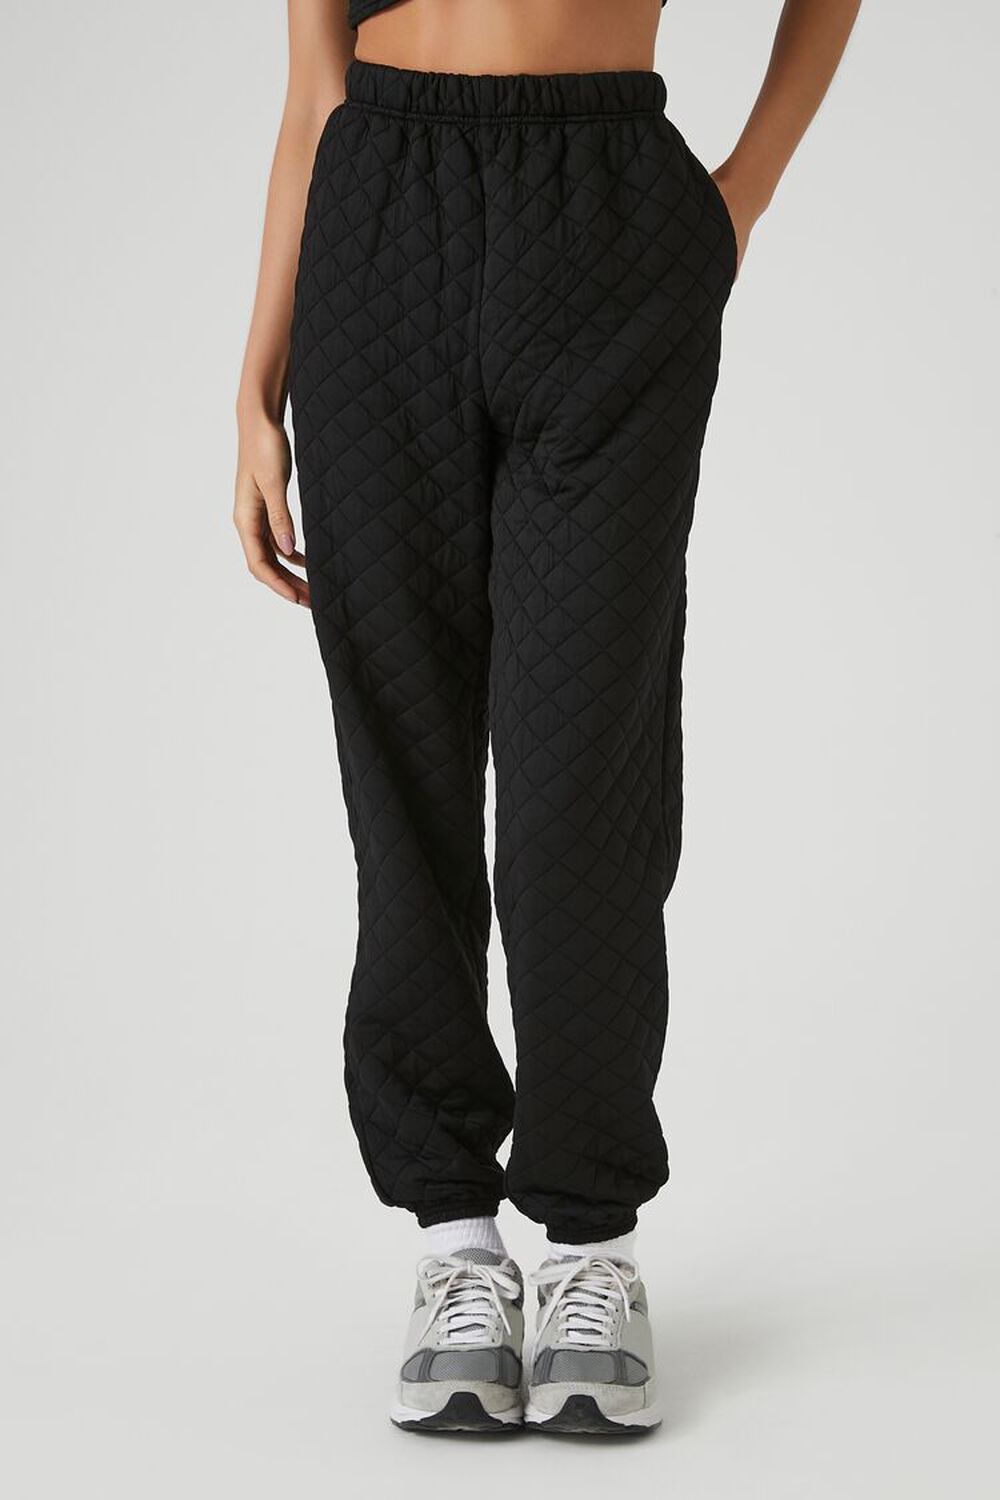 BLACK Quilted Ankle Joggers, image 2